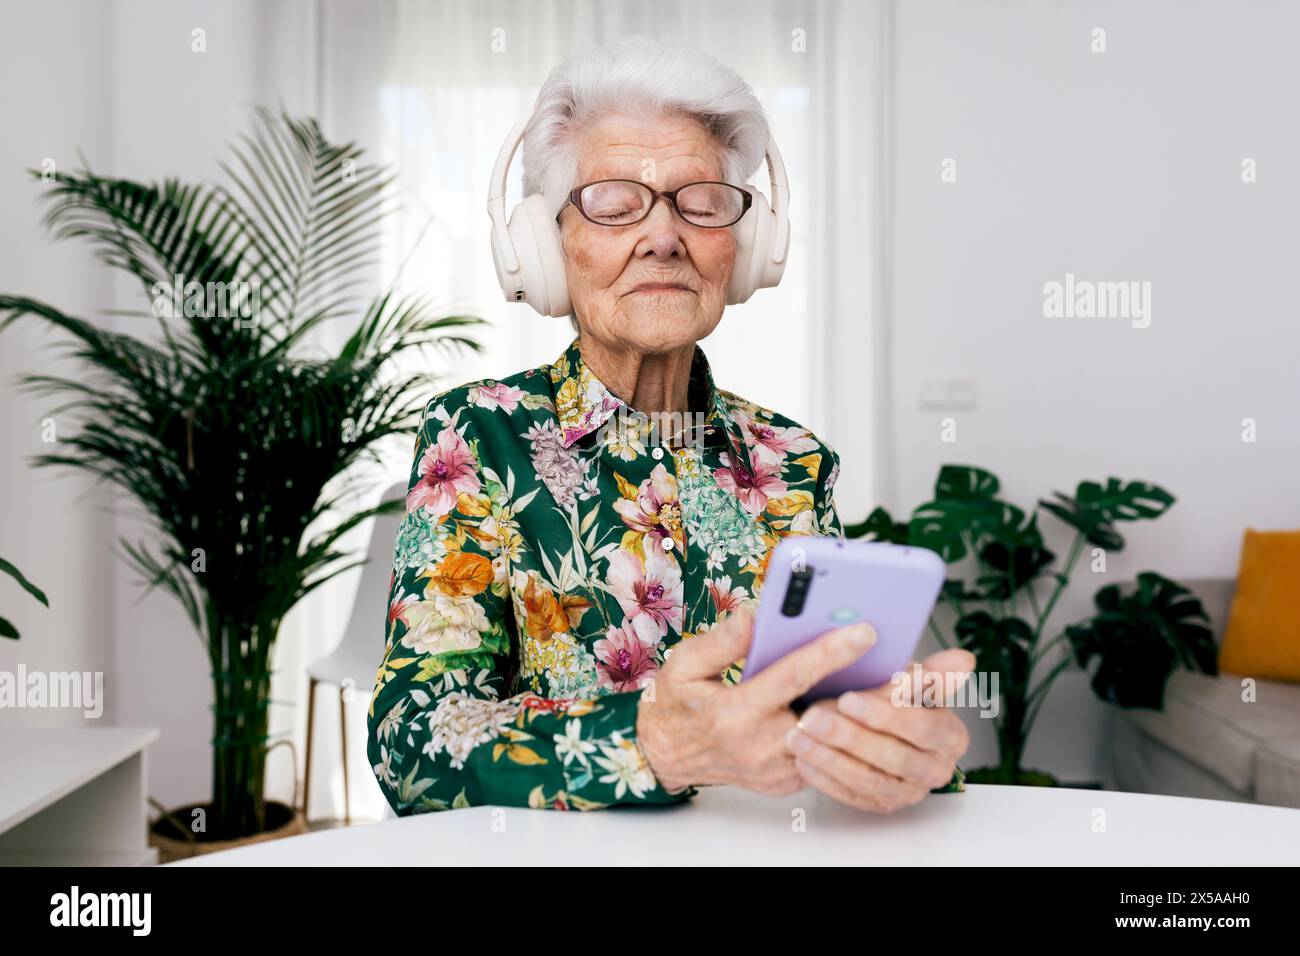 Elderly woman in a floral shirt enjoys music with white headphones while holding a smartphone in a brightly lit living room Stock Photo